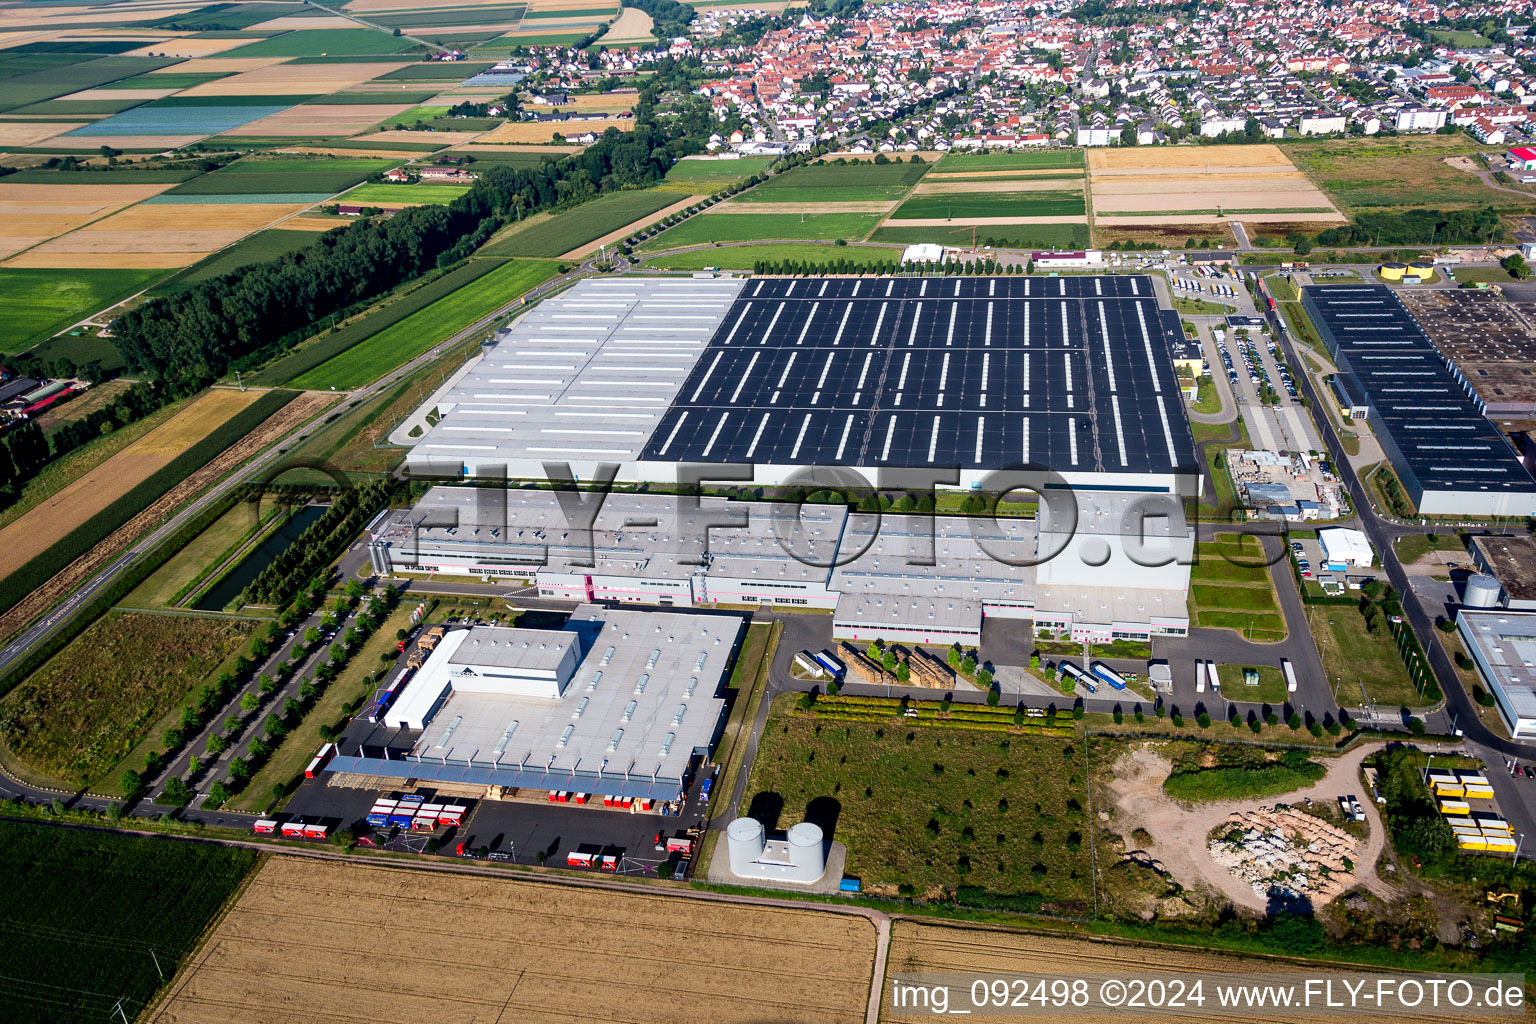 Aerial view of Building and production halls on the premises of Prowell GmbH in Offenbach an der Queich in the state Rhineland-Palatinate, Germany